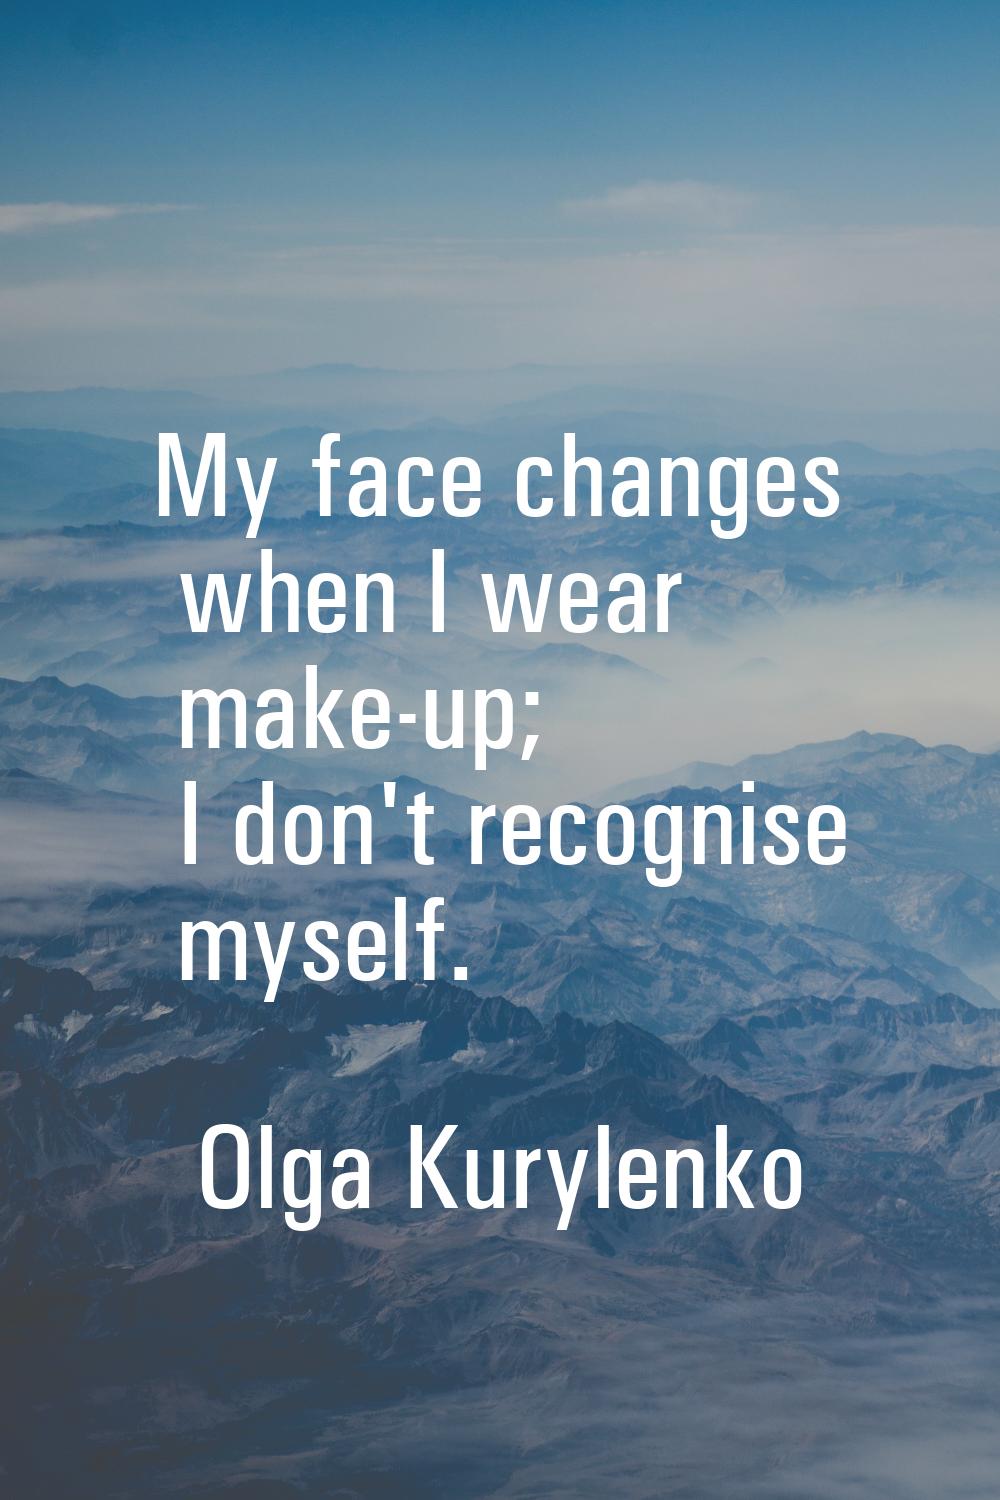 My face changes when I wear make-up; I don't recognise myself.